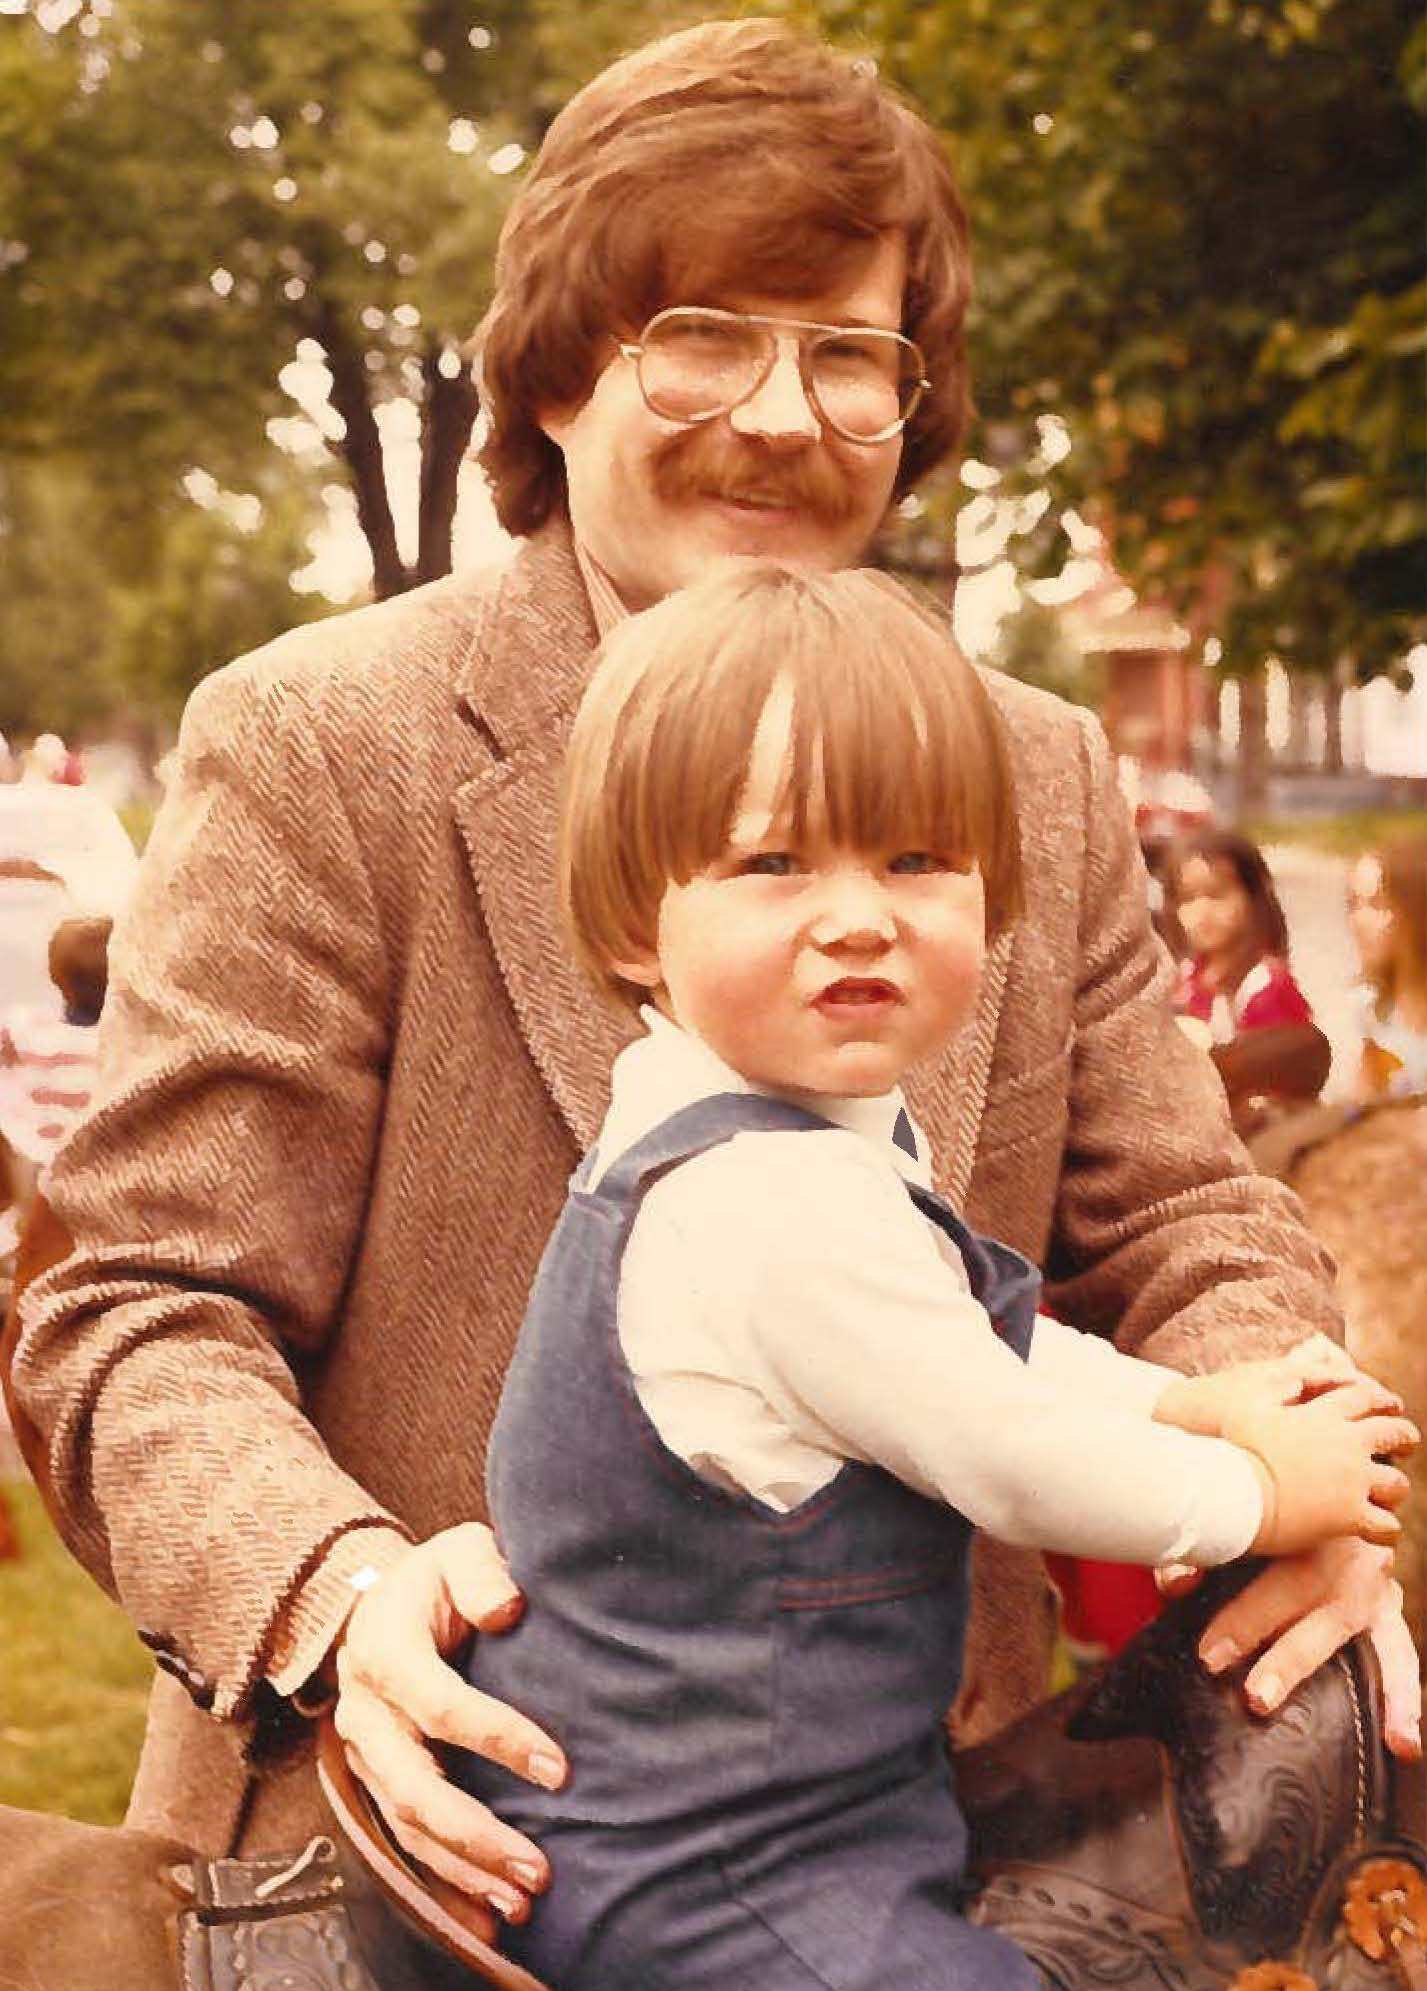 Sean Nuttall ’01 with his father, whose passing inspired Nuttall to use his platform to bring awareness to supporting research on neurodegenerative diseases.